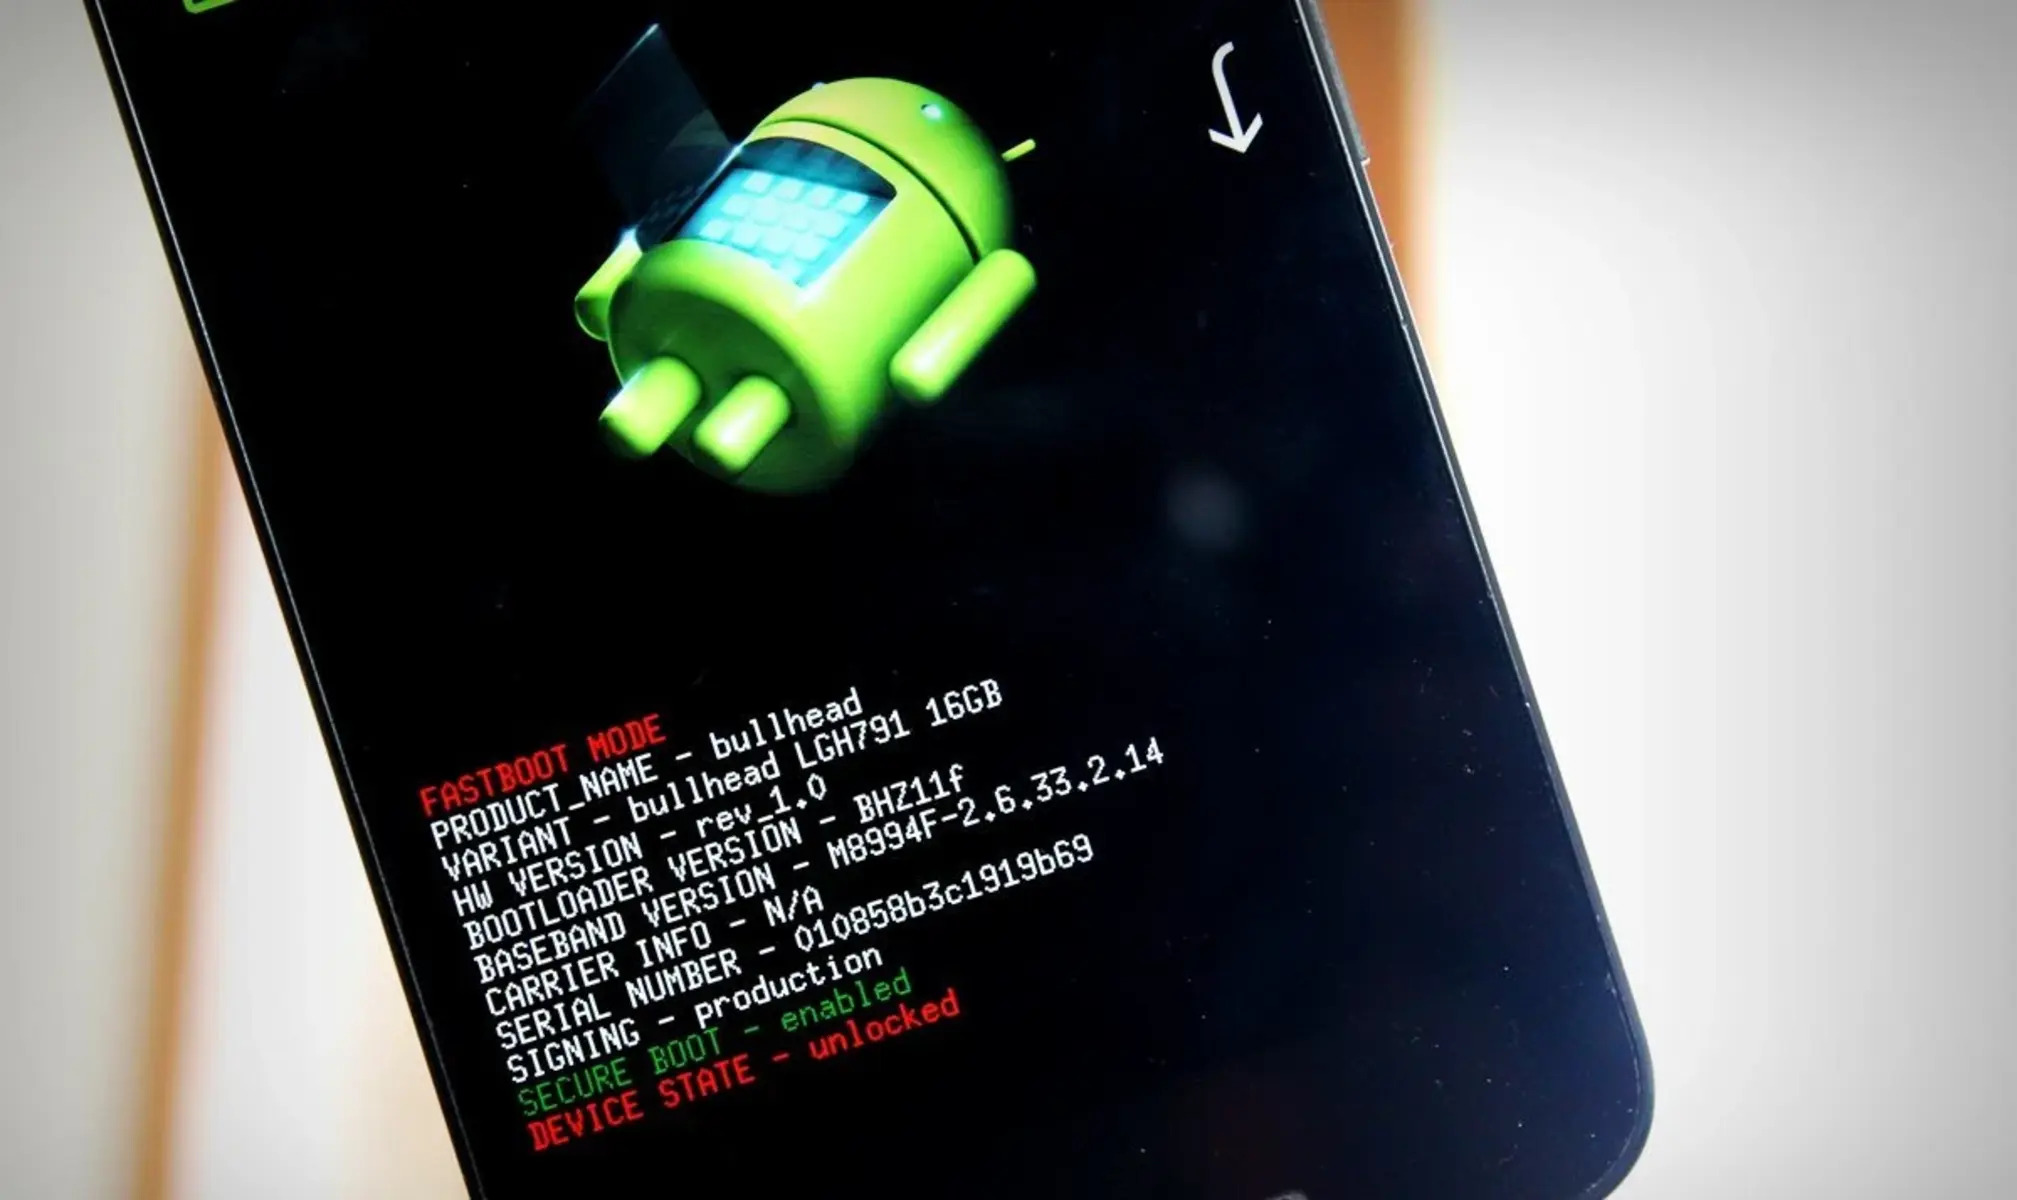 How To Unlock The Bootloader On Your Android Phone